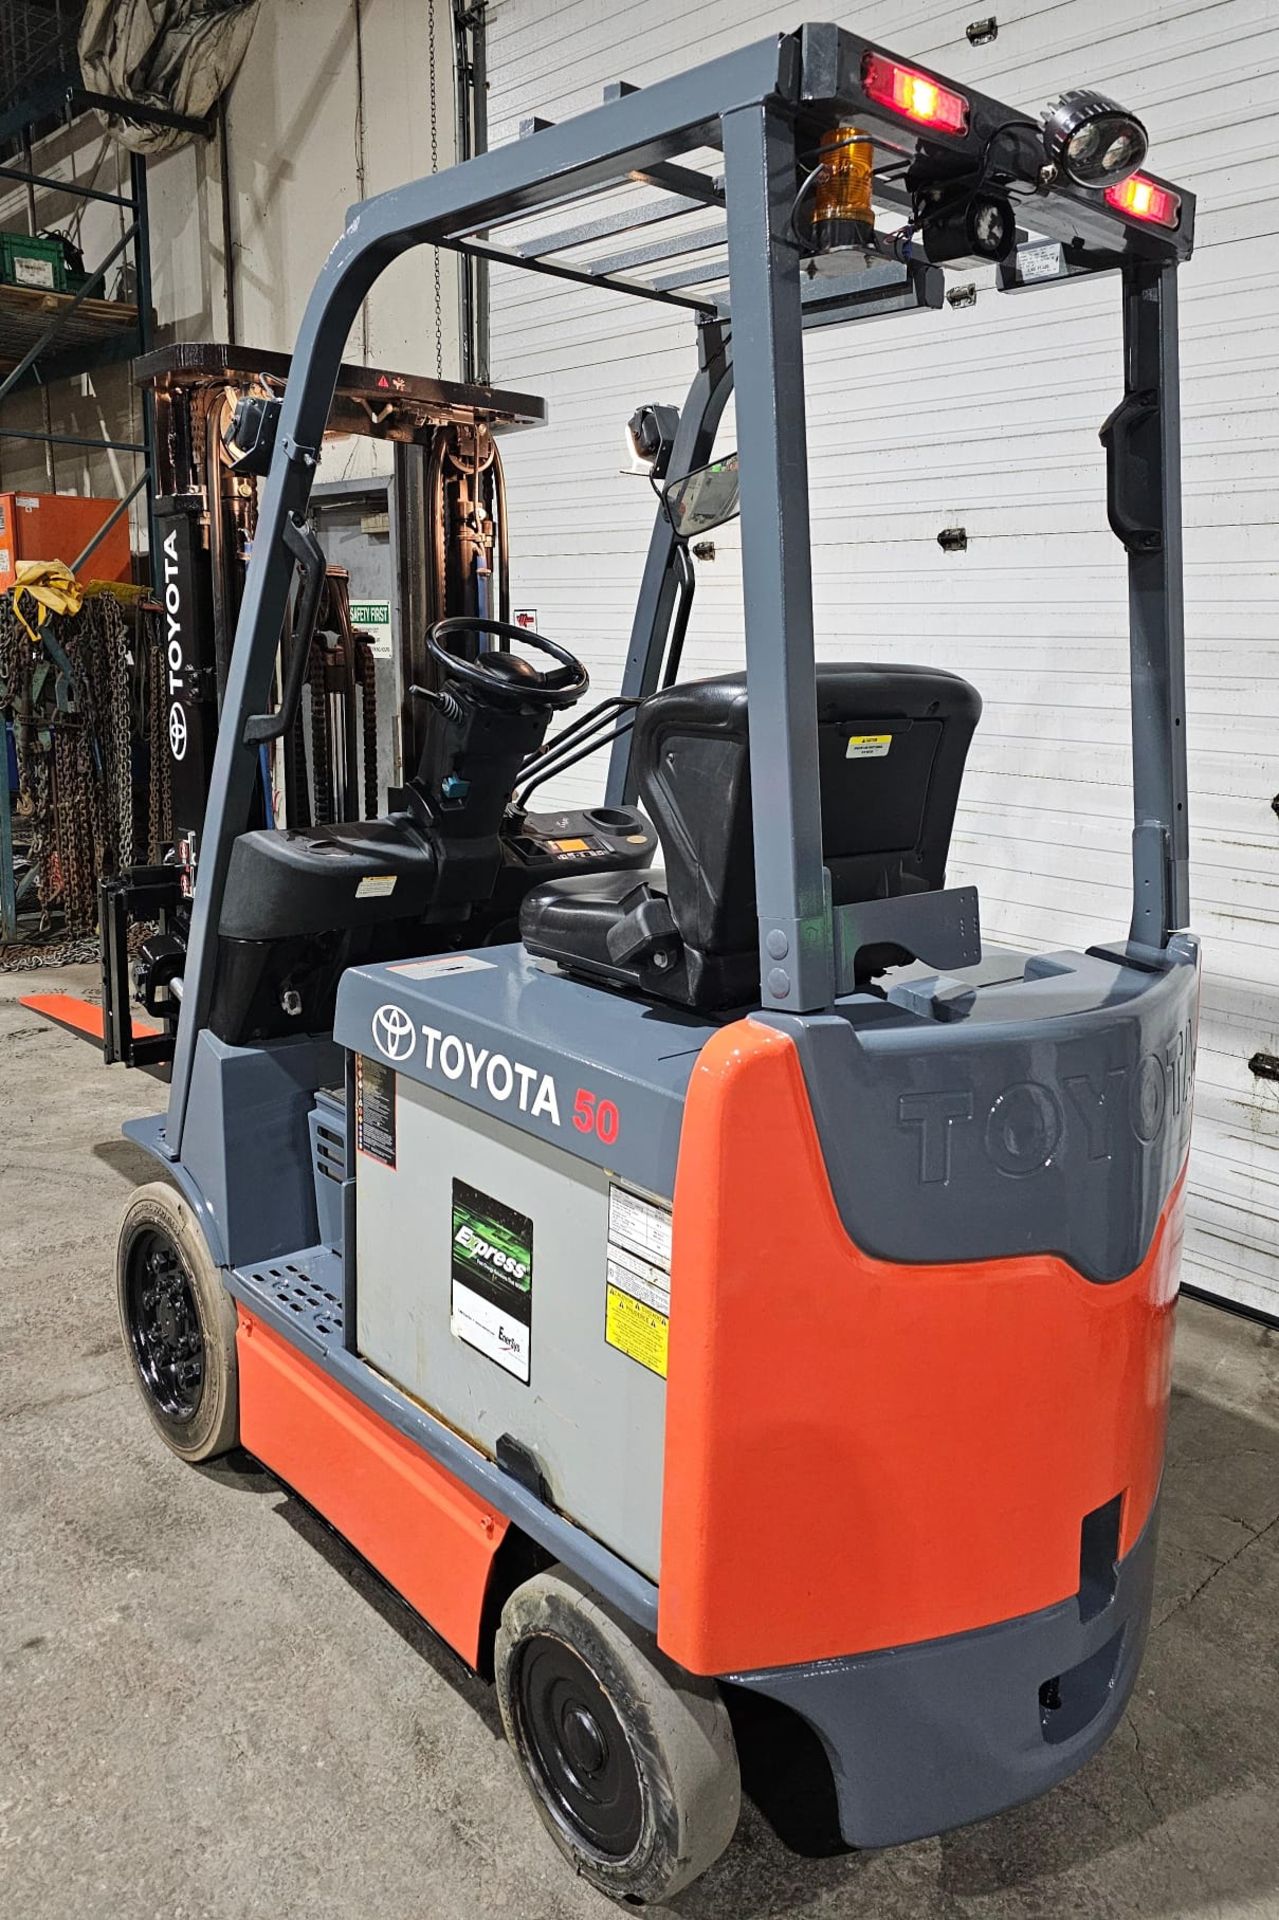 2012 TOYOTA 5,000lbs Capacity Electric Forklift 48V with sideshift & 3-Stage Mast 189" Lift Height - - Image 5 of 6